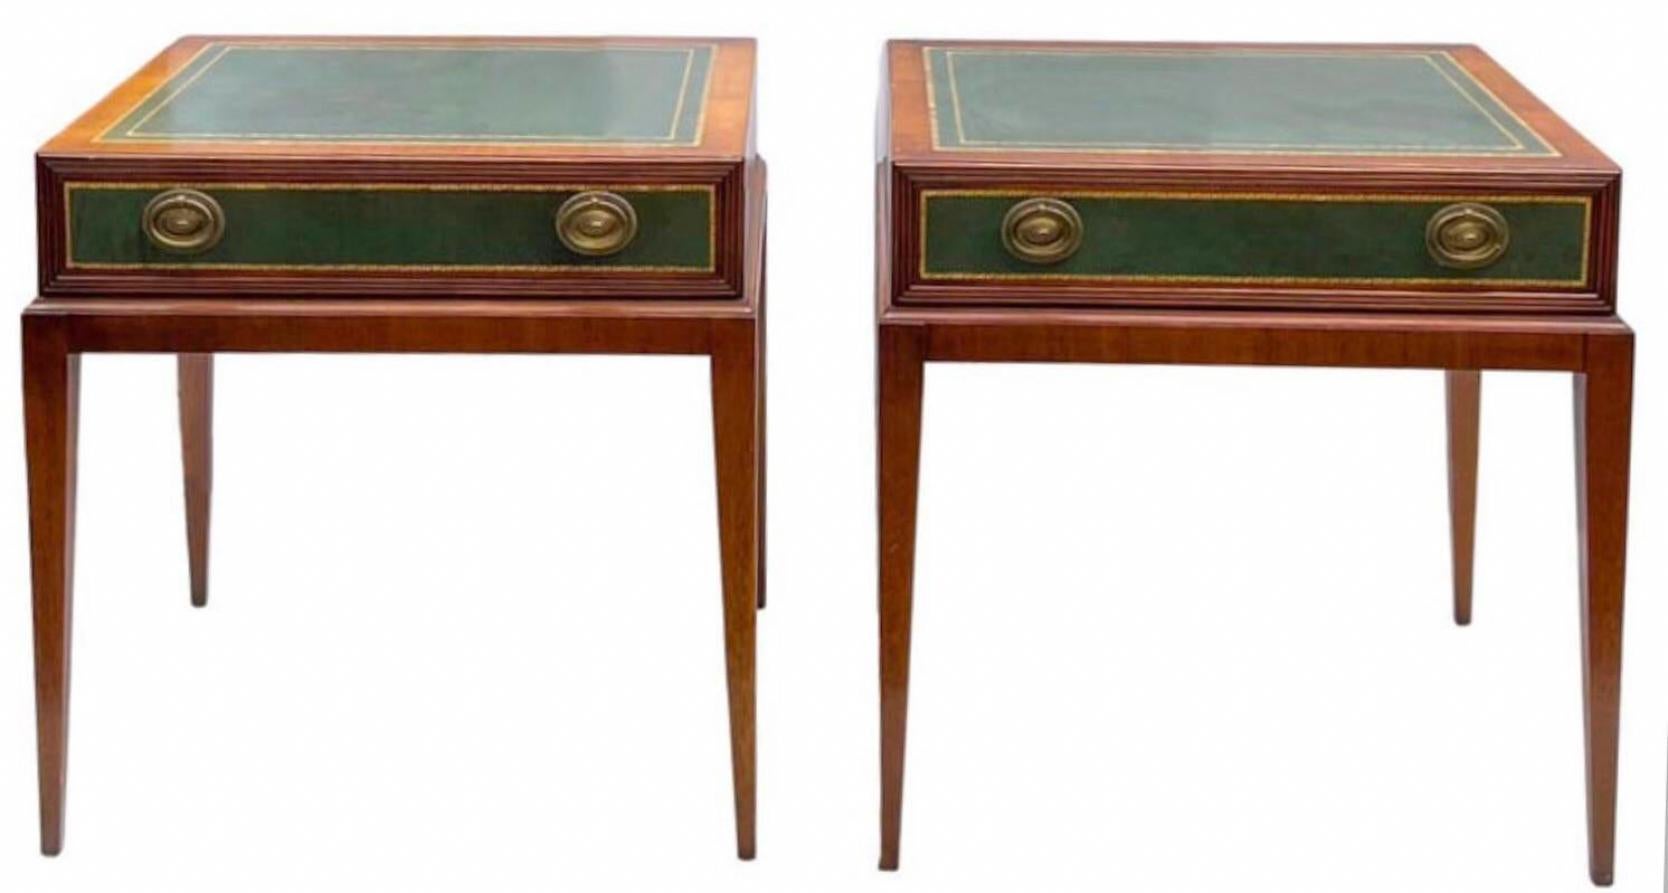 This is a pair of good looking green tooled leather side tables that are in the manner of Parzinger for Charak. They have green tooled leather surfaces and original hardware, but the clean lines and tapered legs really elevate the look. I did not